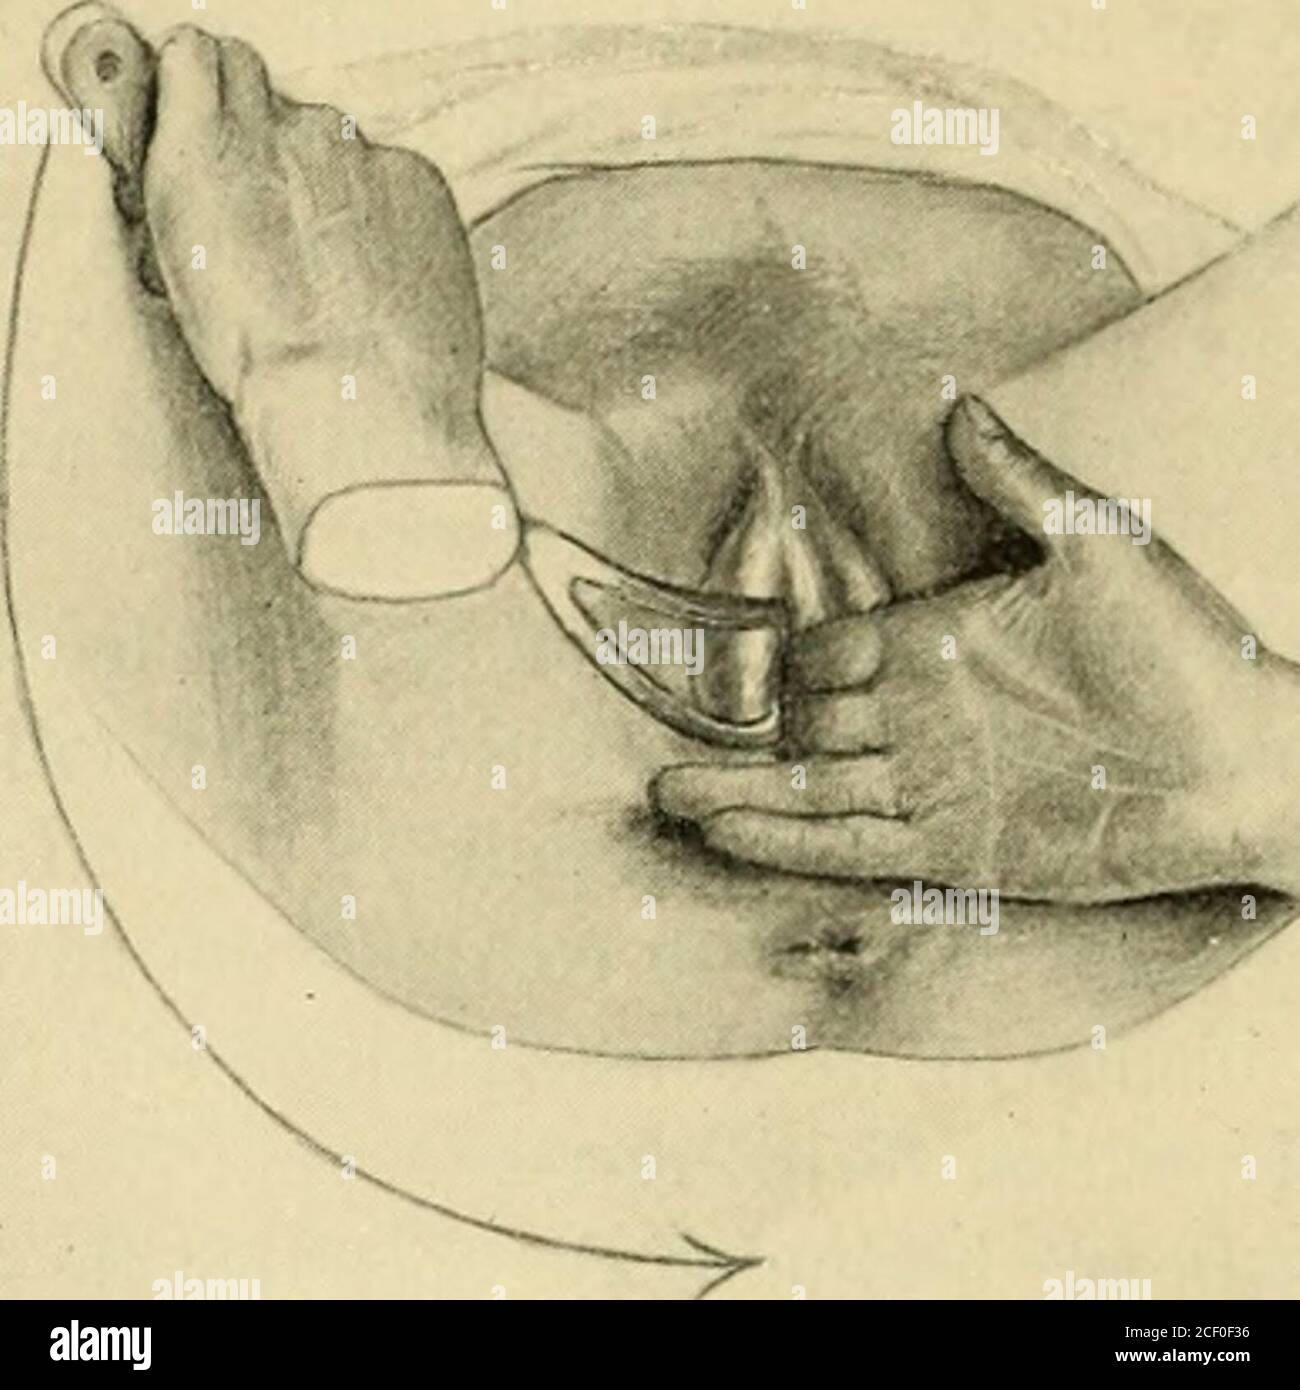 . An American text-book of obstetrics. For practitioners and students. rs. Some operatorsprefer placing the patient in the lithotomy position, the knees being supportedand steadied by a couple of assistants. The operator sits in front of the patient,between the everted thighs. The lower blade of the forceps is passed first intothe left side of the pelvis, then the upper blade is passed into the right side;when properly adjusted, the blades are locked and extraction is begun. Tointroduce a forceps-blade properly both hands are used, one to pass the blade,the other to guide it up to and around t Stock Photo